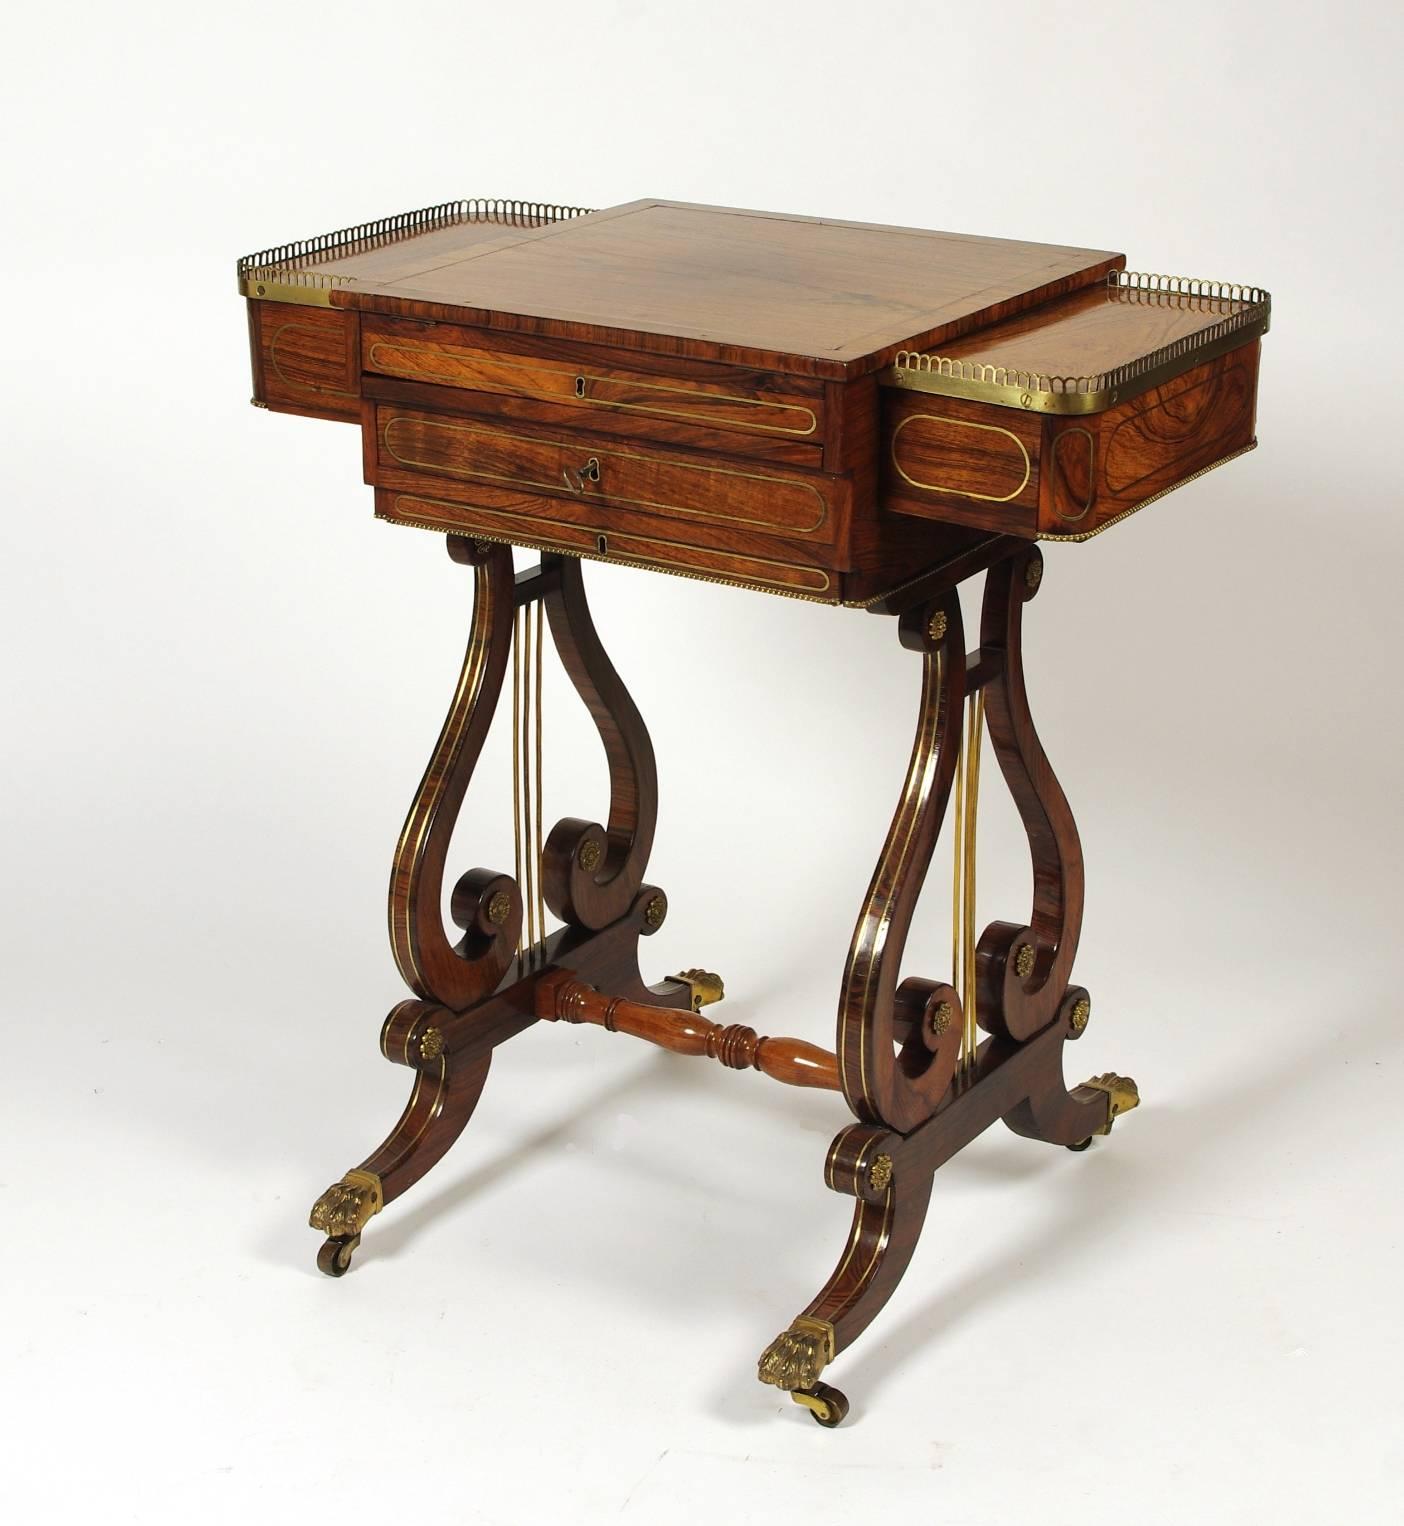 Fine Regency brass inlaid rosewood combination work or games table, the easel top opening to backgammon and chess; the drawers fitted for watercolor supplies; the rectangular ends with pierced galleries and drawers; the lyre supports on out-swept